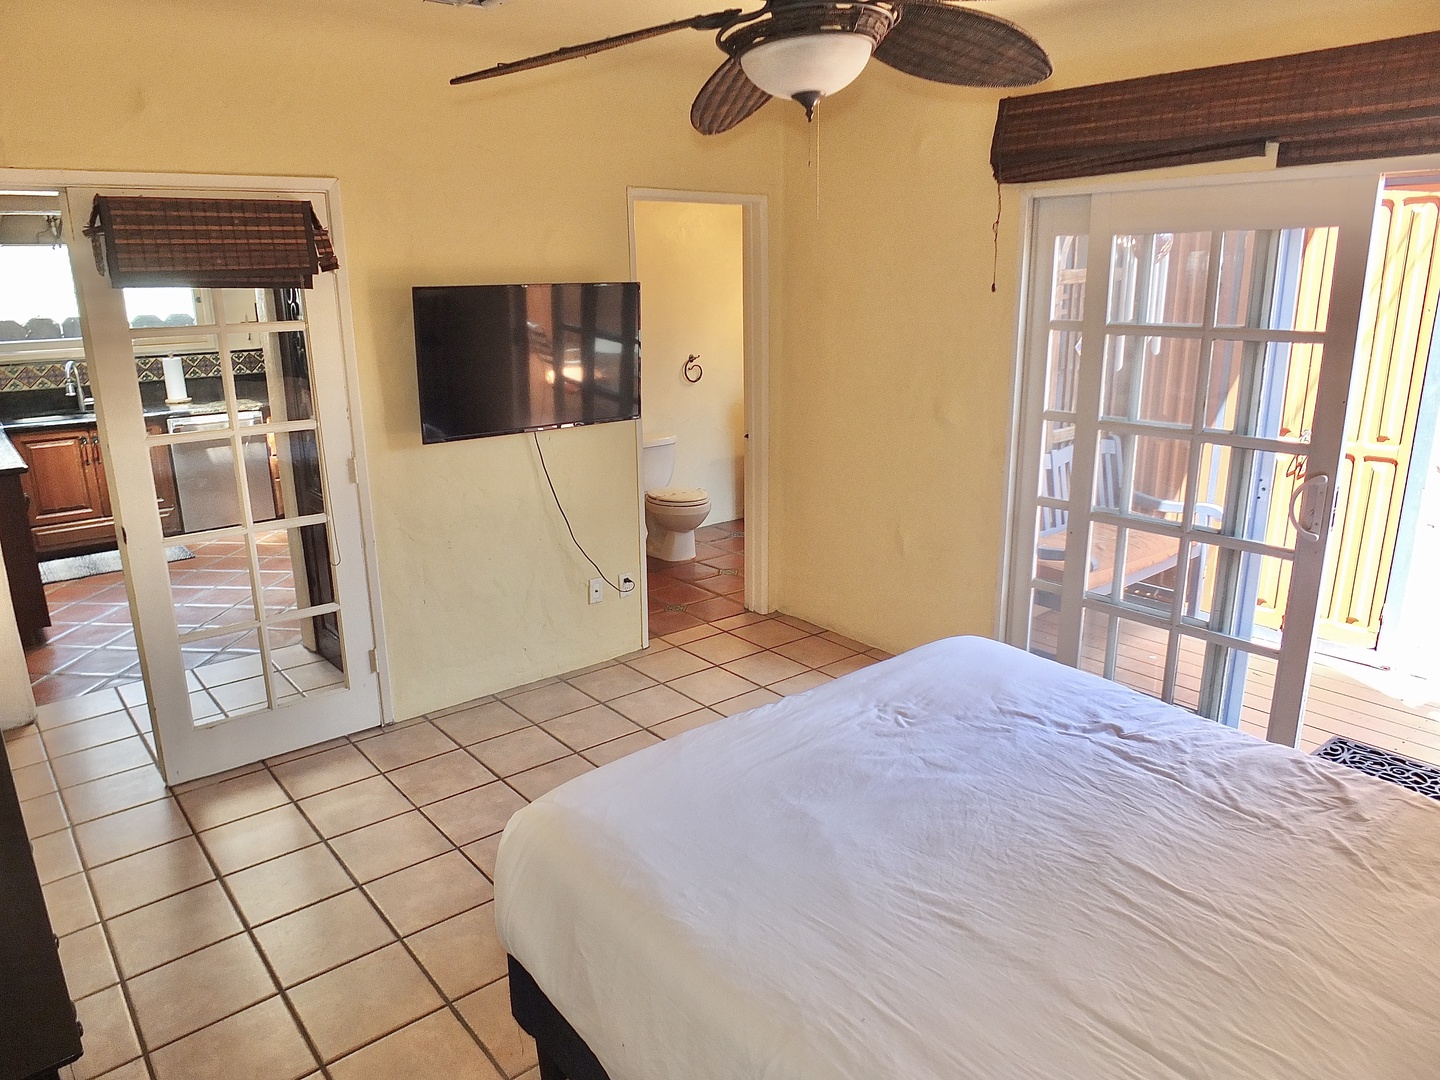 The 1st Floor queen bedroom offers deck access and a private en suite